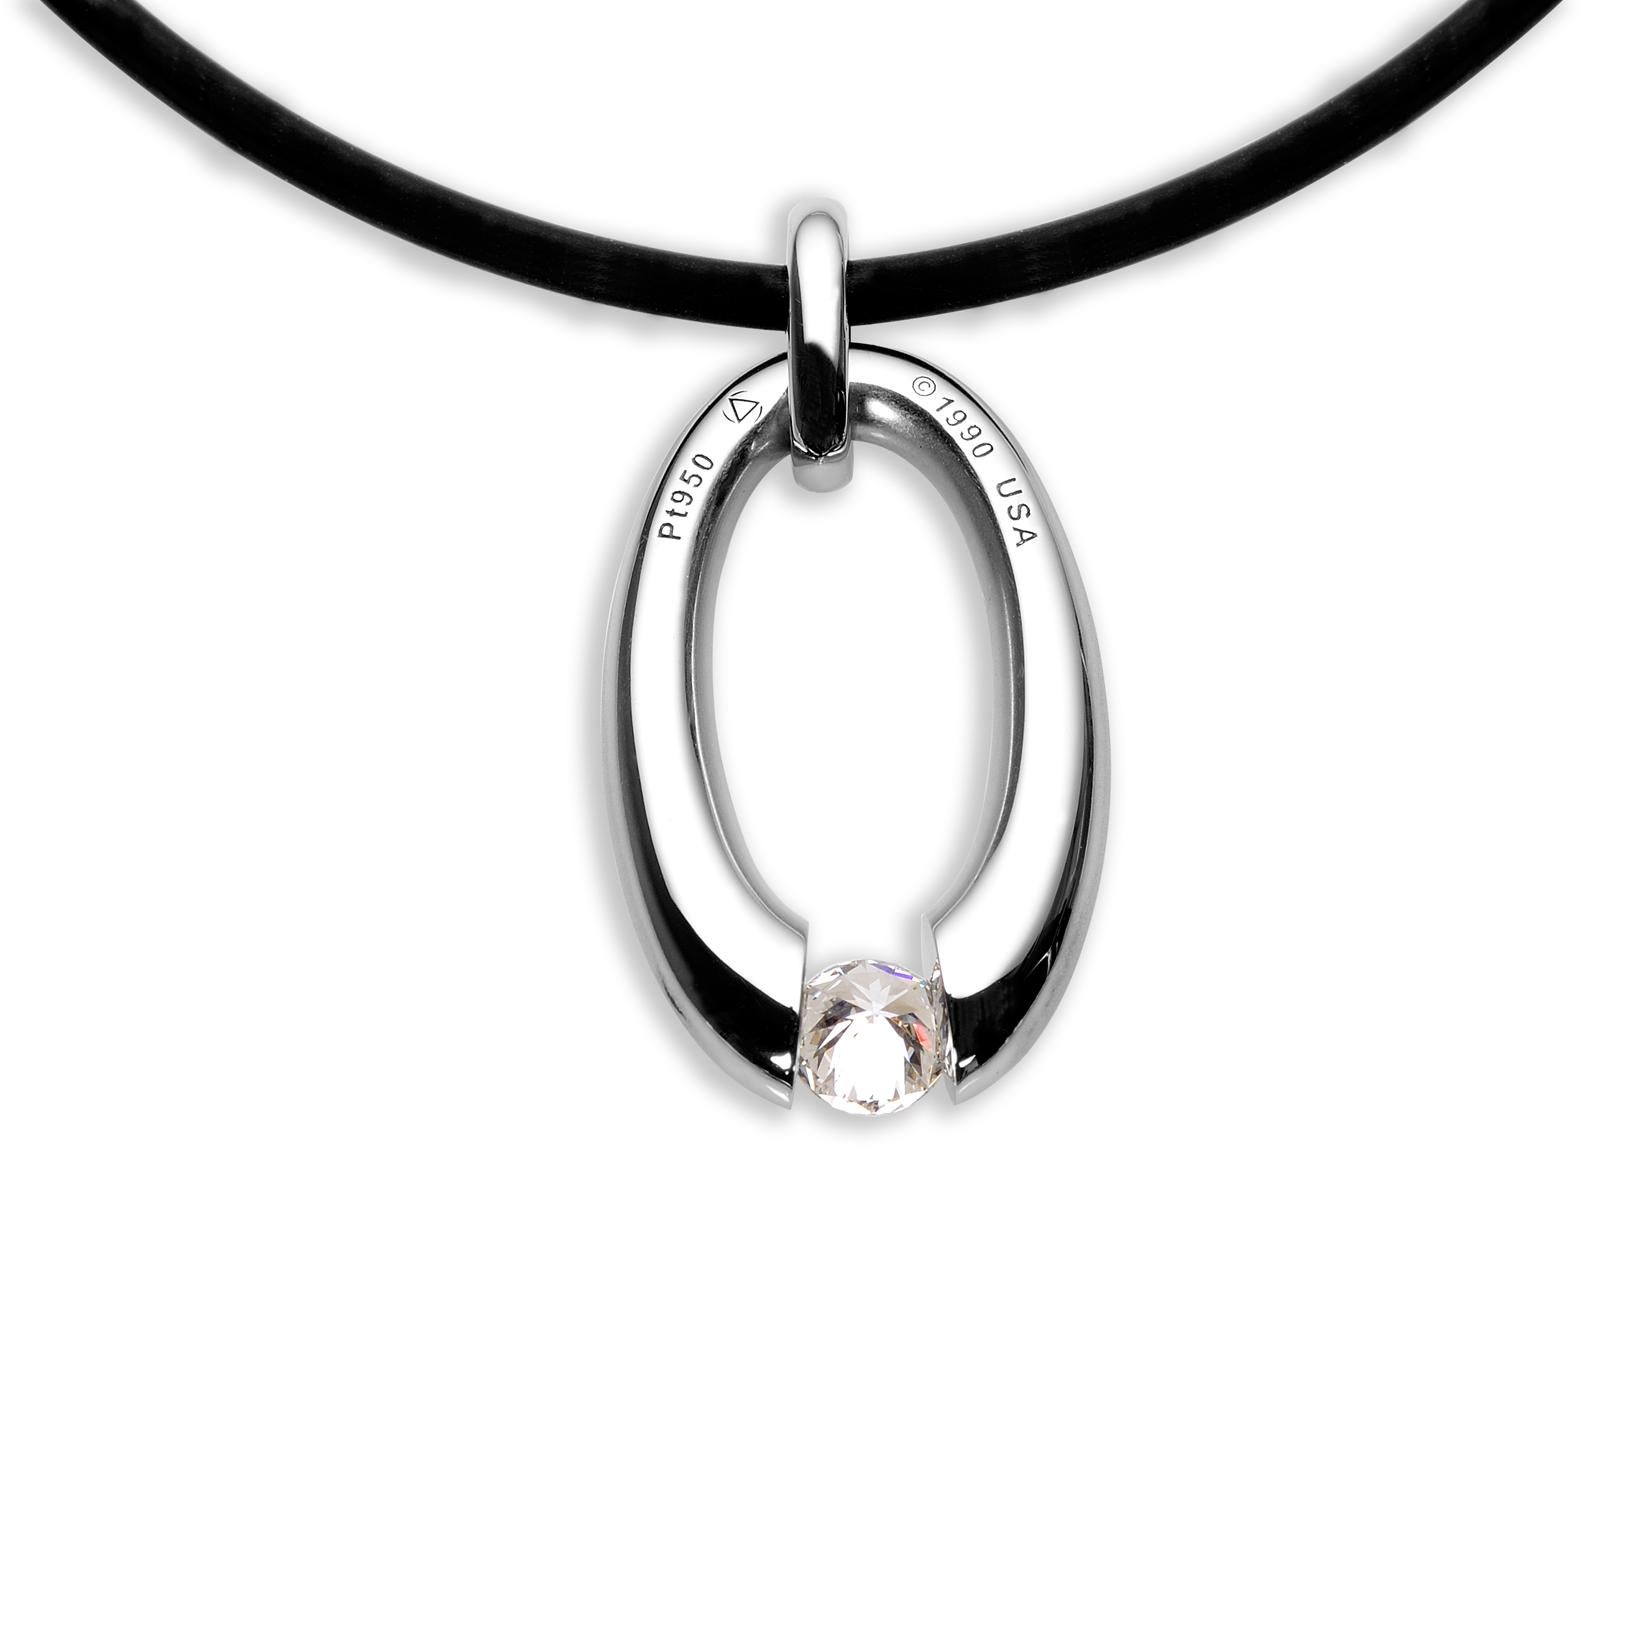 The Steven Kretchmer Small Oval Pendant with a tension-set diamond is handcrafted in a half-matte platinum with a shiny platinum bail. The 0.34 ct diamond is a brilliant round cut, F color, and has VS clarity. The pendant features a scattered melee